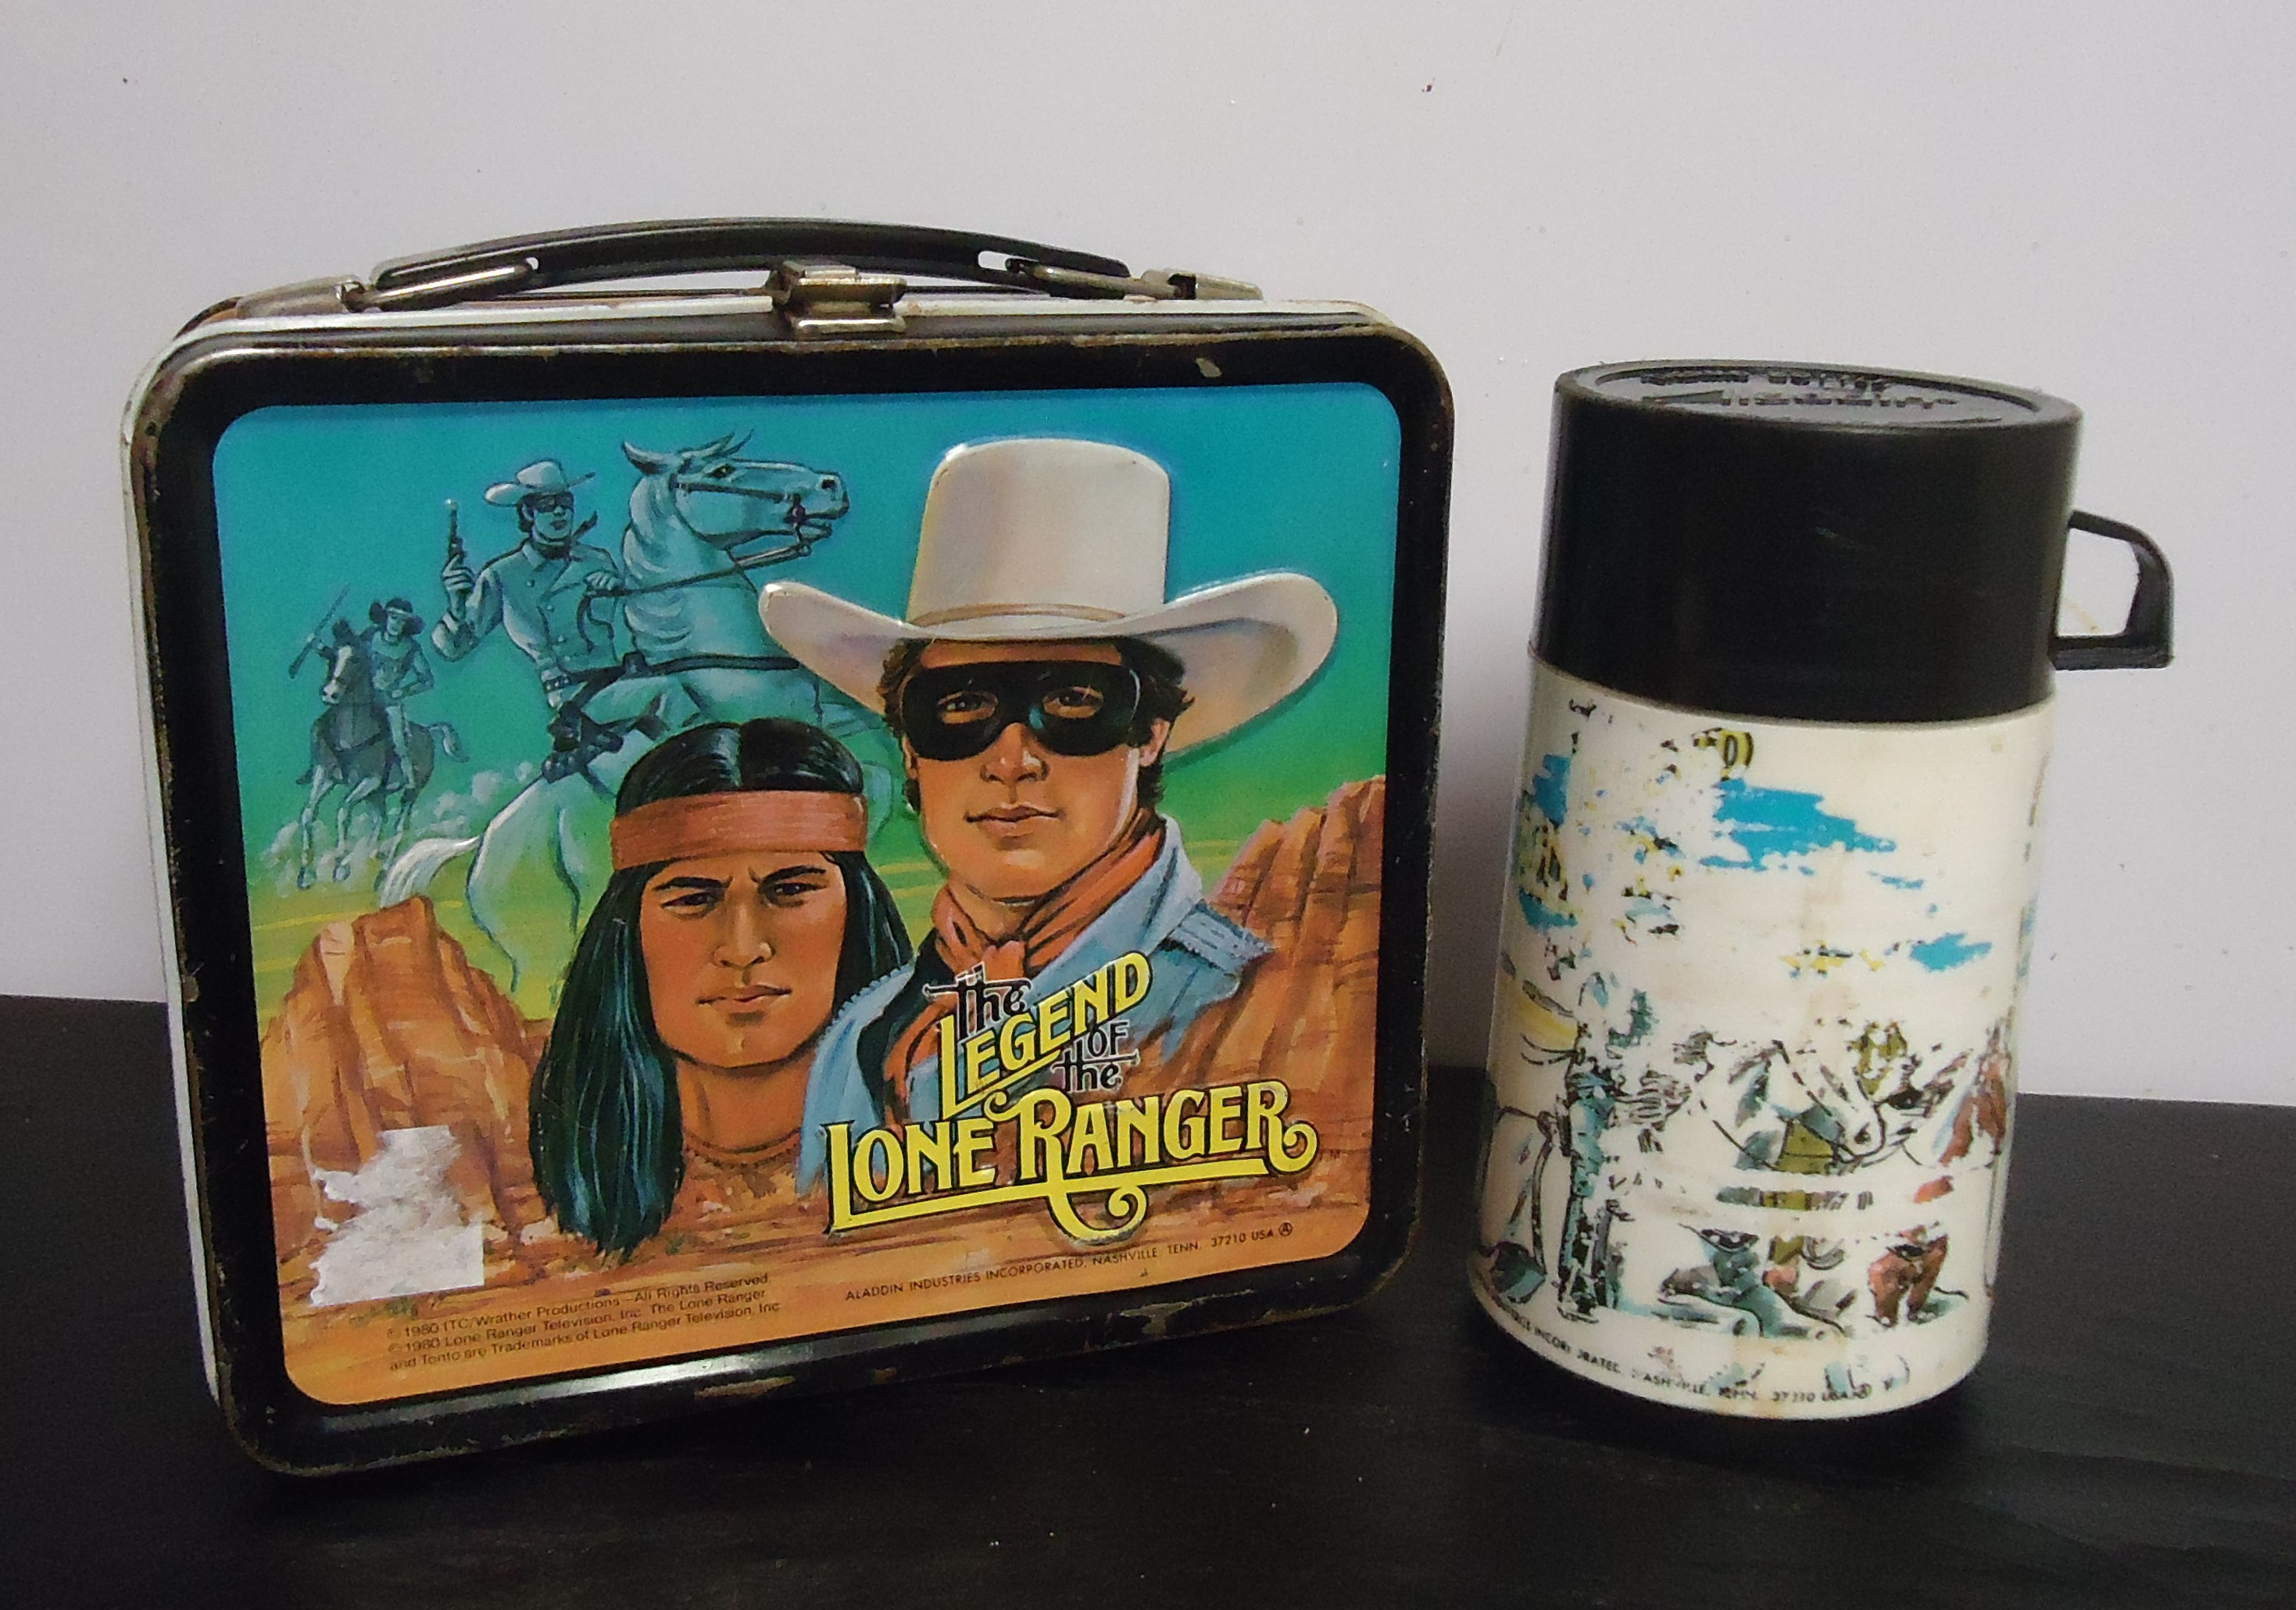 (2D) "The Lone Ranger" Metal Lunch Box
W/ Thermos
$50.00